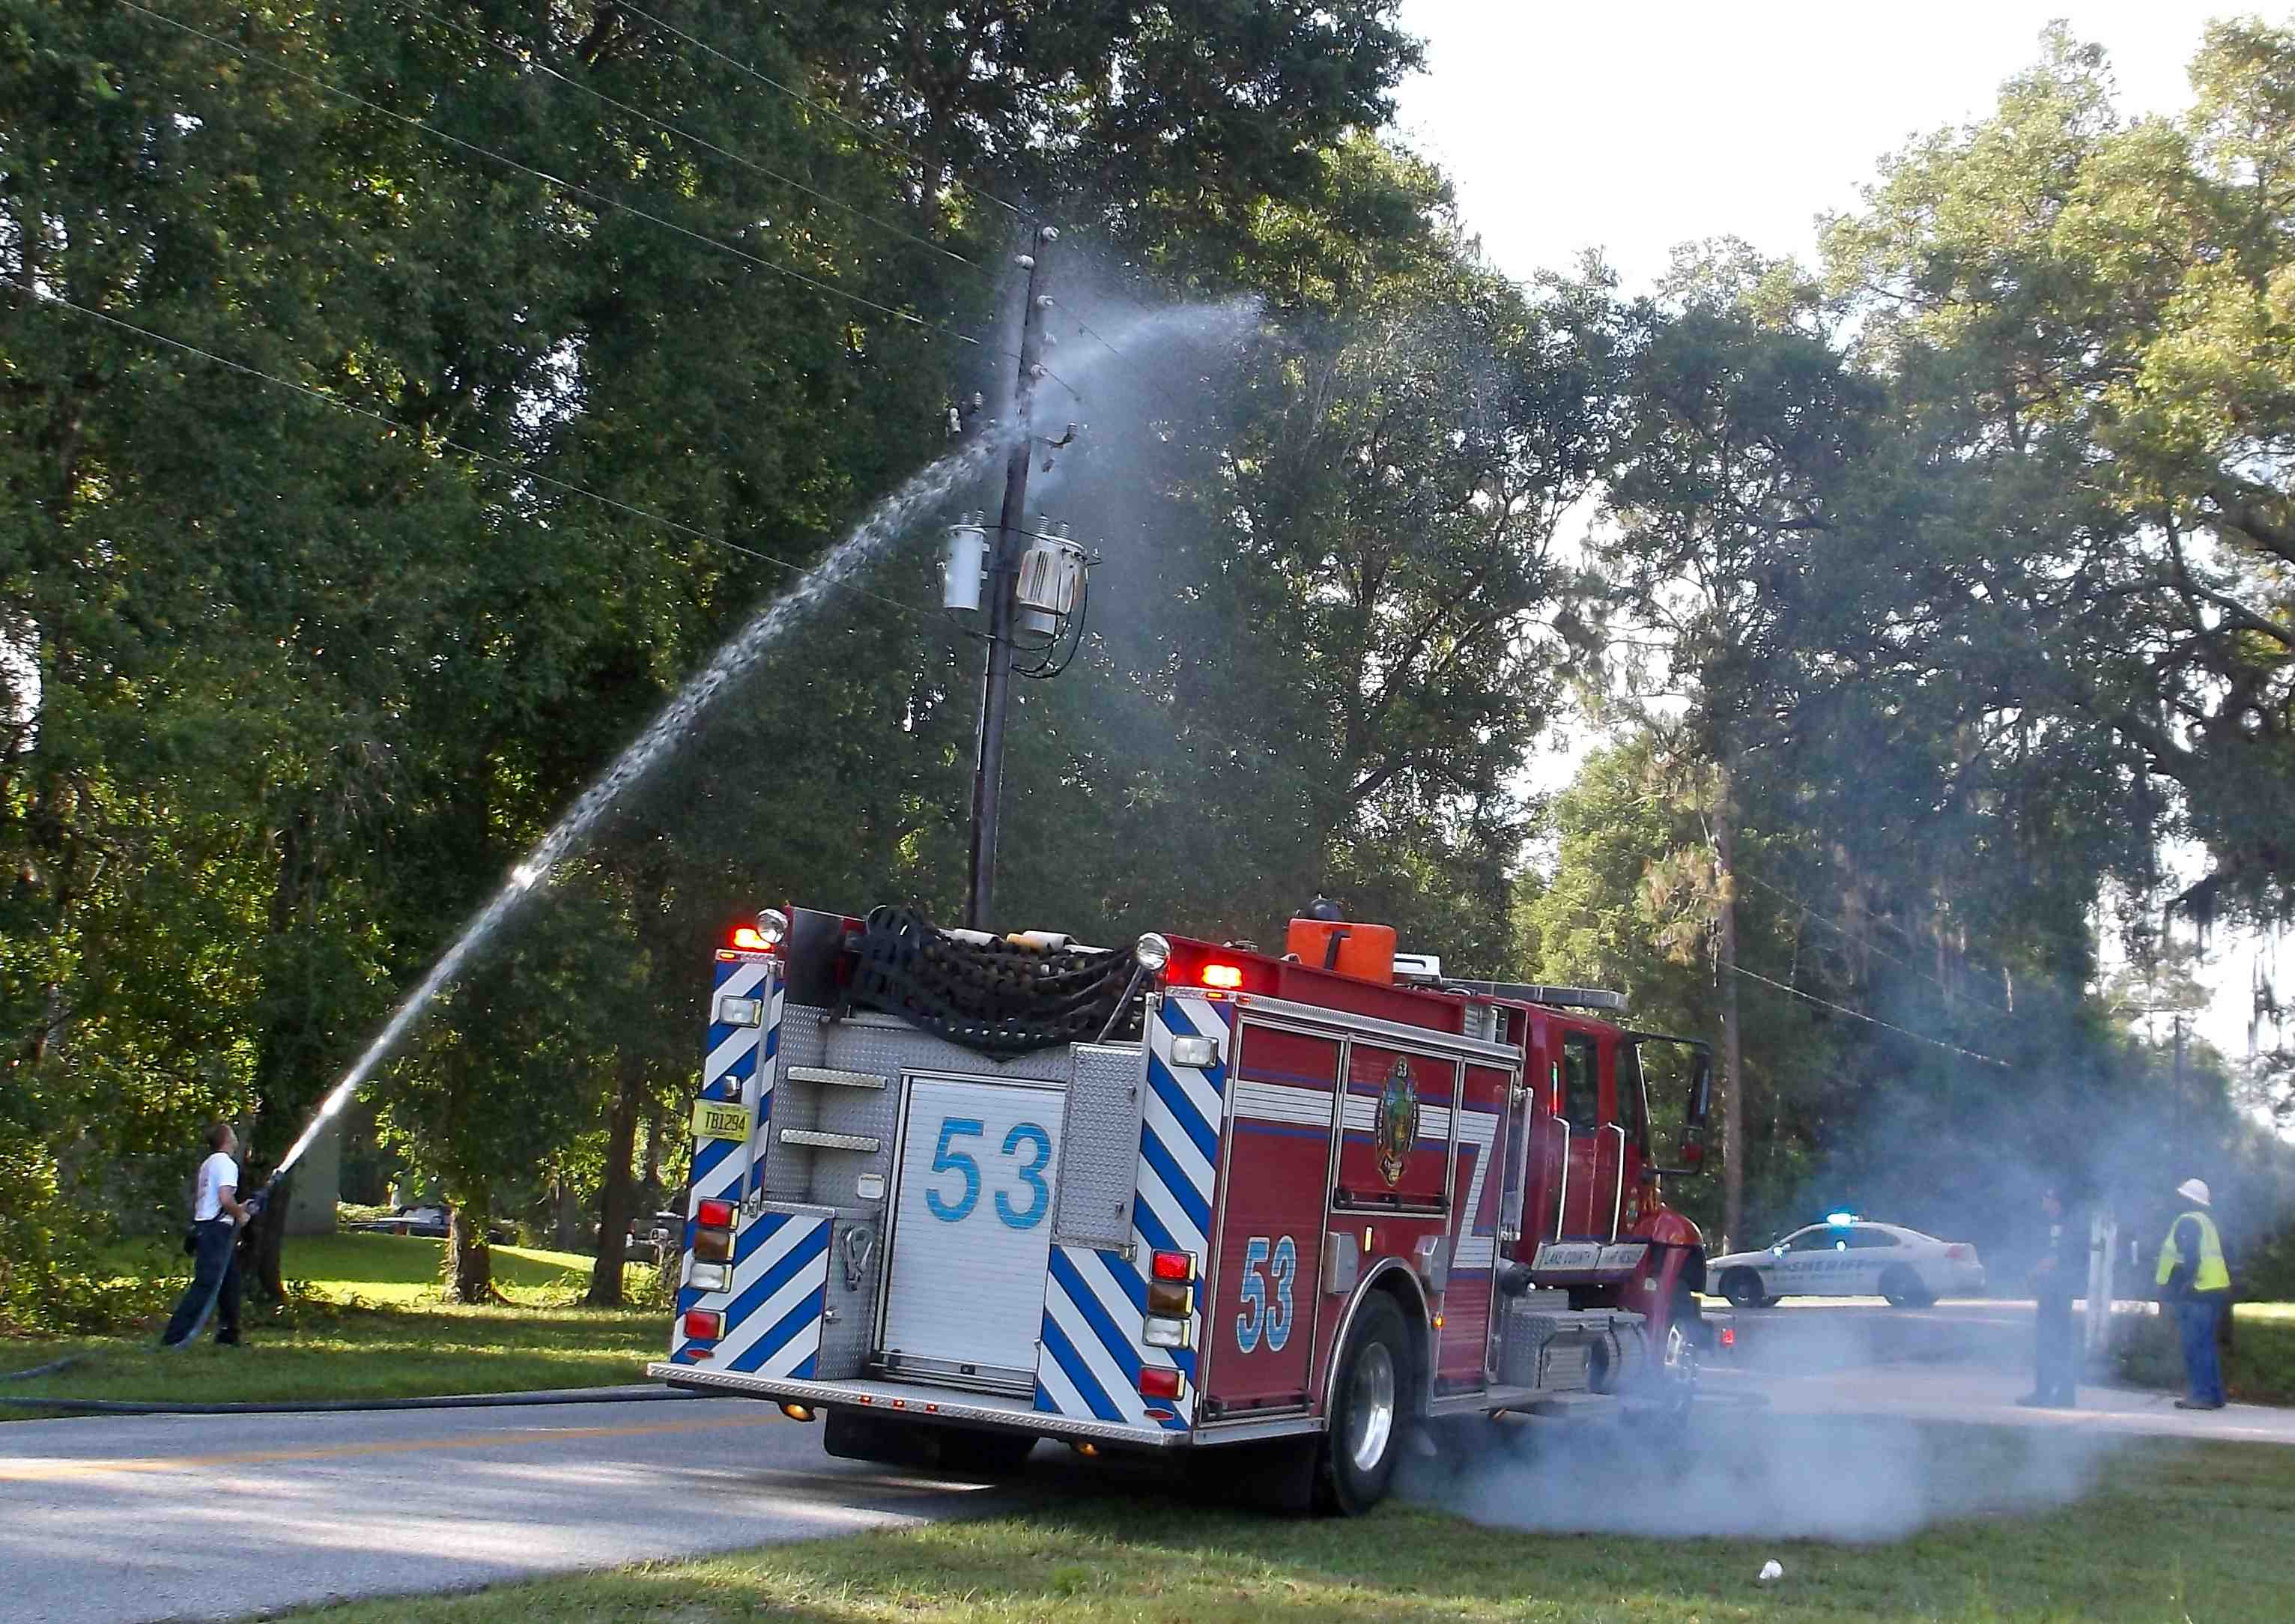 Lake County Fire Rescue puts out a fire at a power pole on Rolling Acres Road.